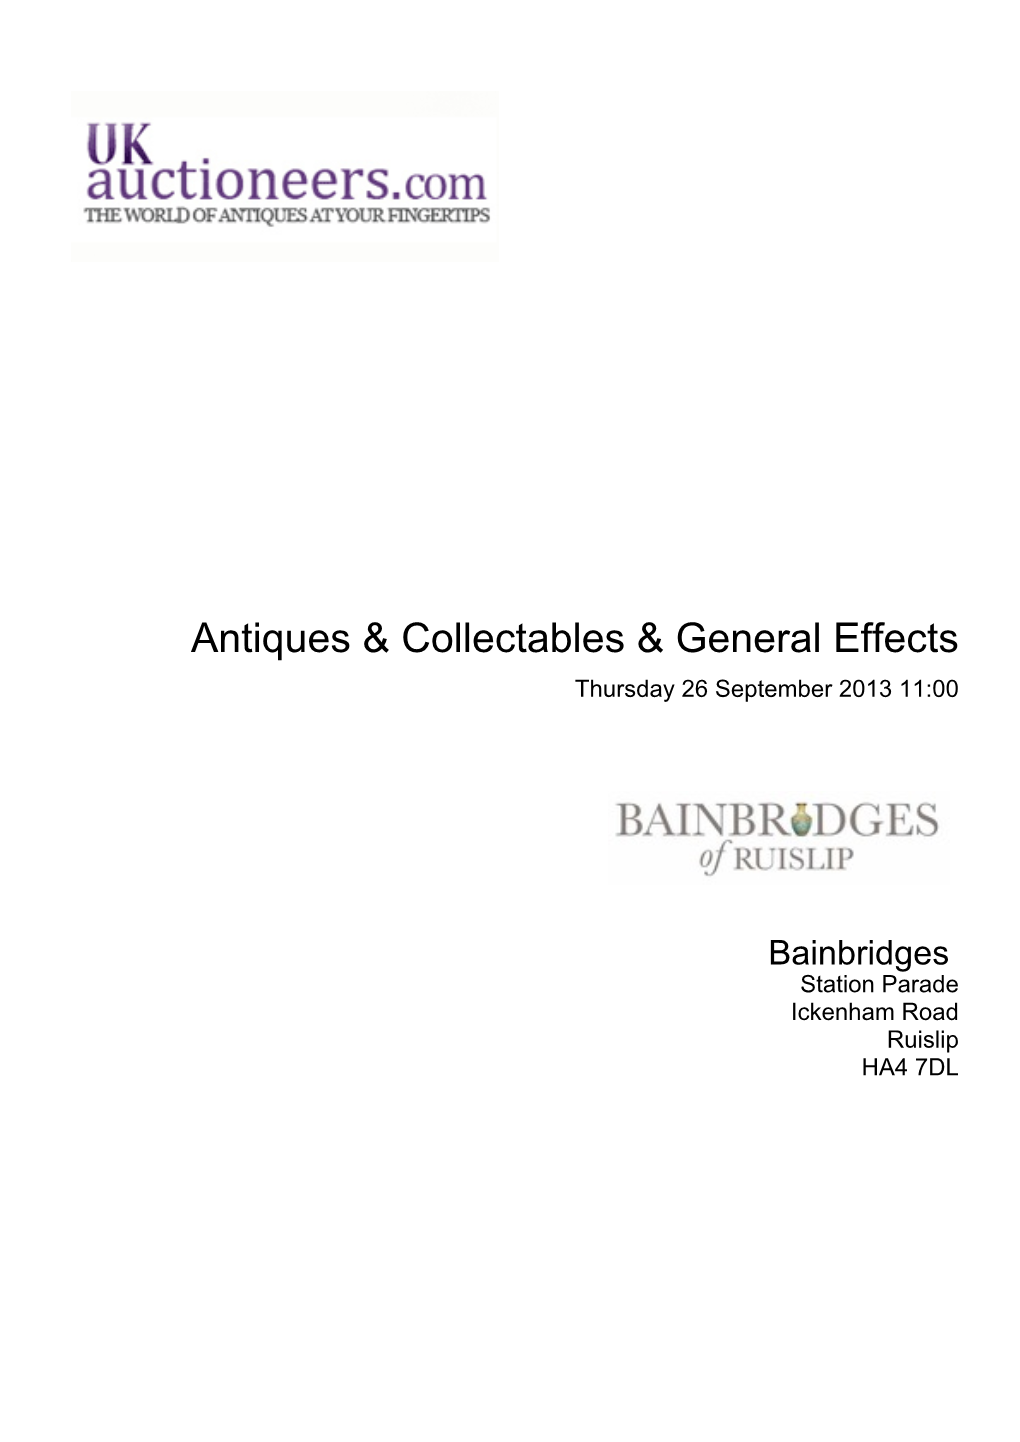 Antiques & Collectables & General Effects